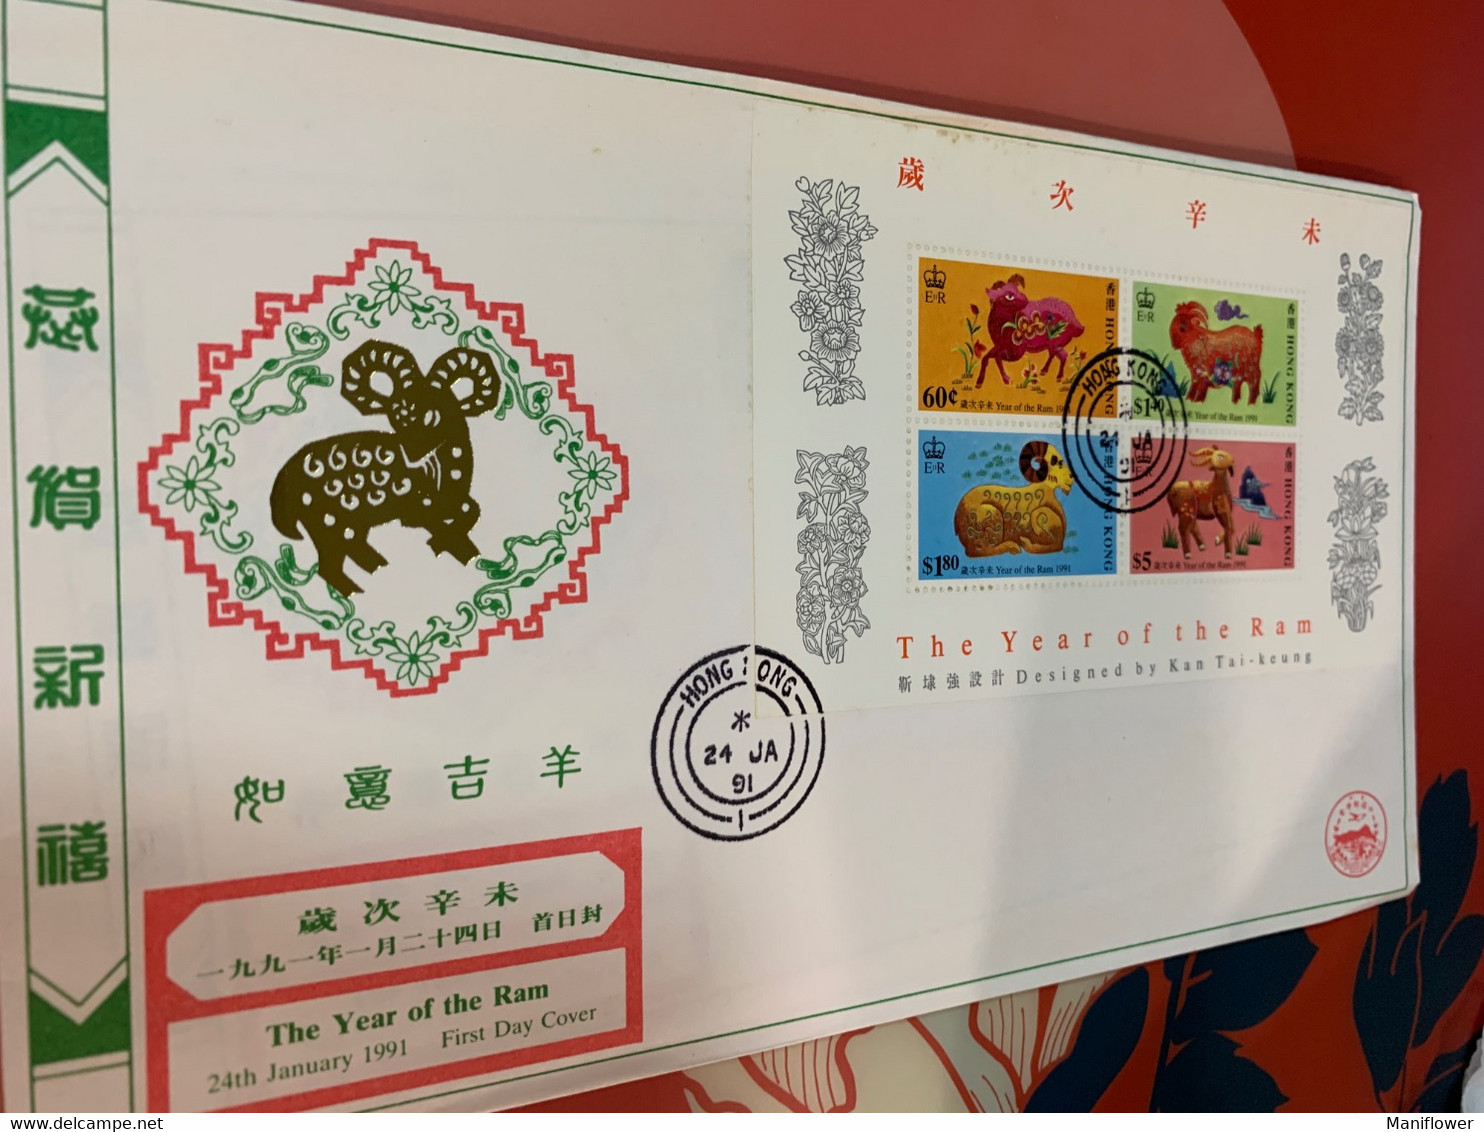 Hong Kong Stamp FDC Cover 1991 New Year Goat - Enteros Postales